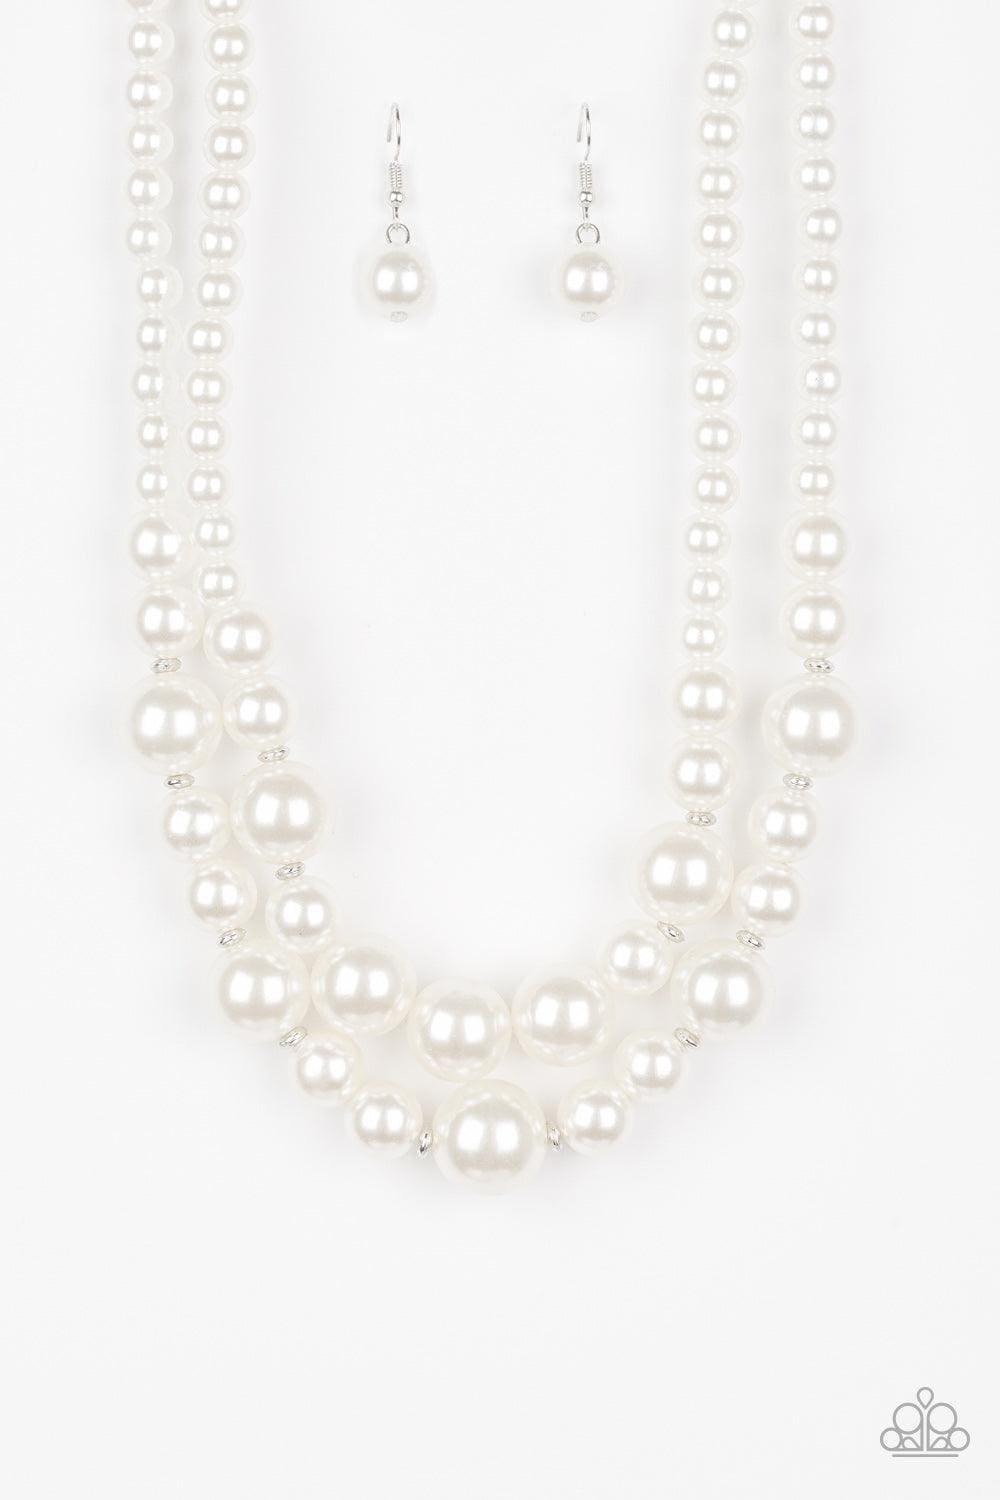 Paparazzi Accessories - The More The Modest - White Necklace - Bling by JessieK